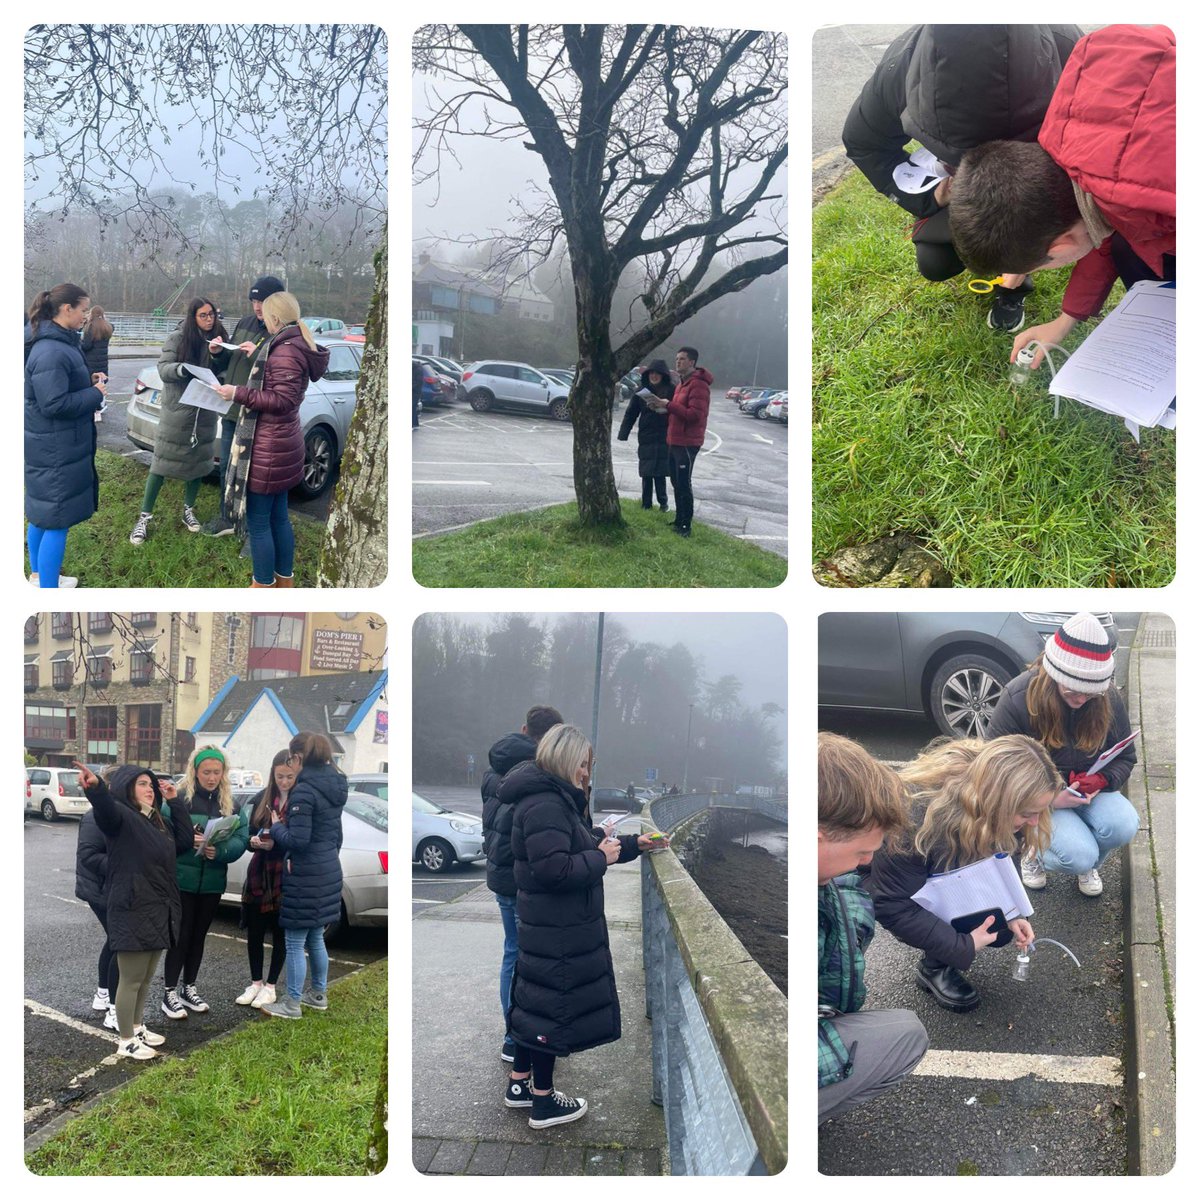 PME in Primary Education Autumn 23 student teachers outdoor learning in Geography in Donegal with tutor Grace McCarron.

#HCbecomingateacher #HCAutumn23 #outdoor #learning  #geography #primary #studenteacher